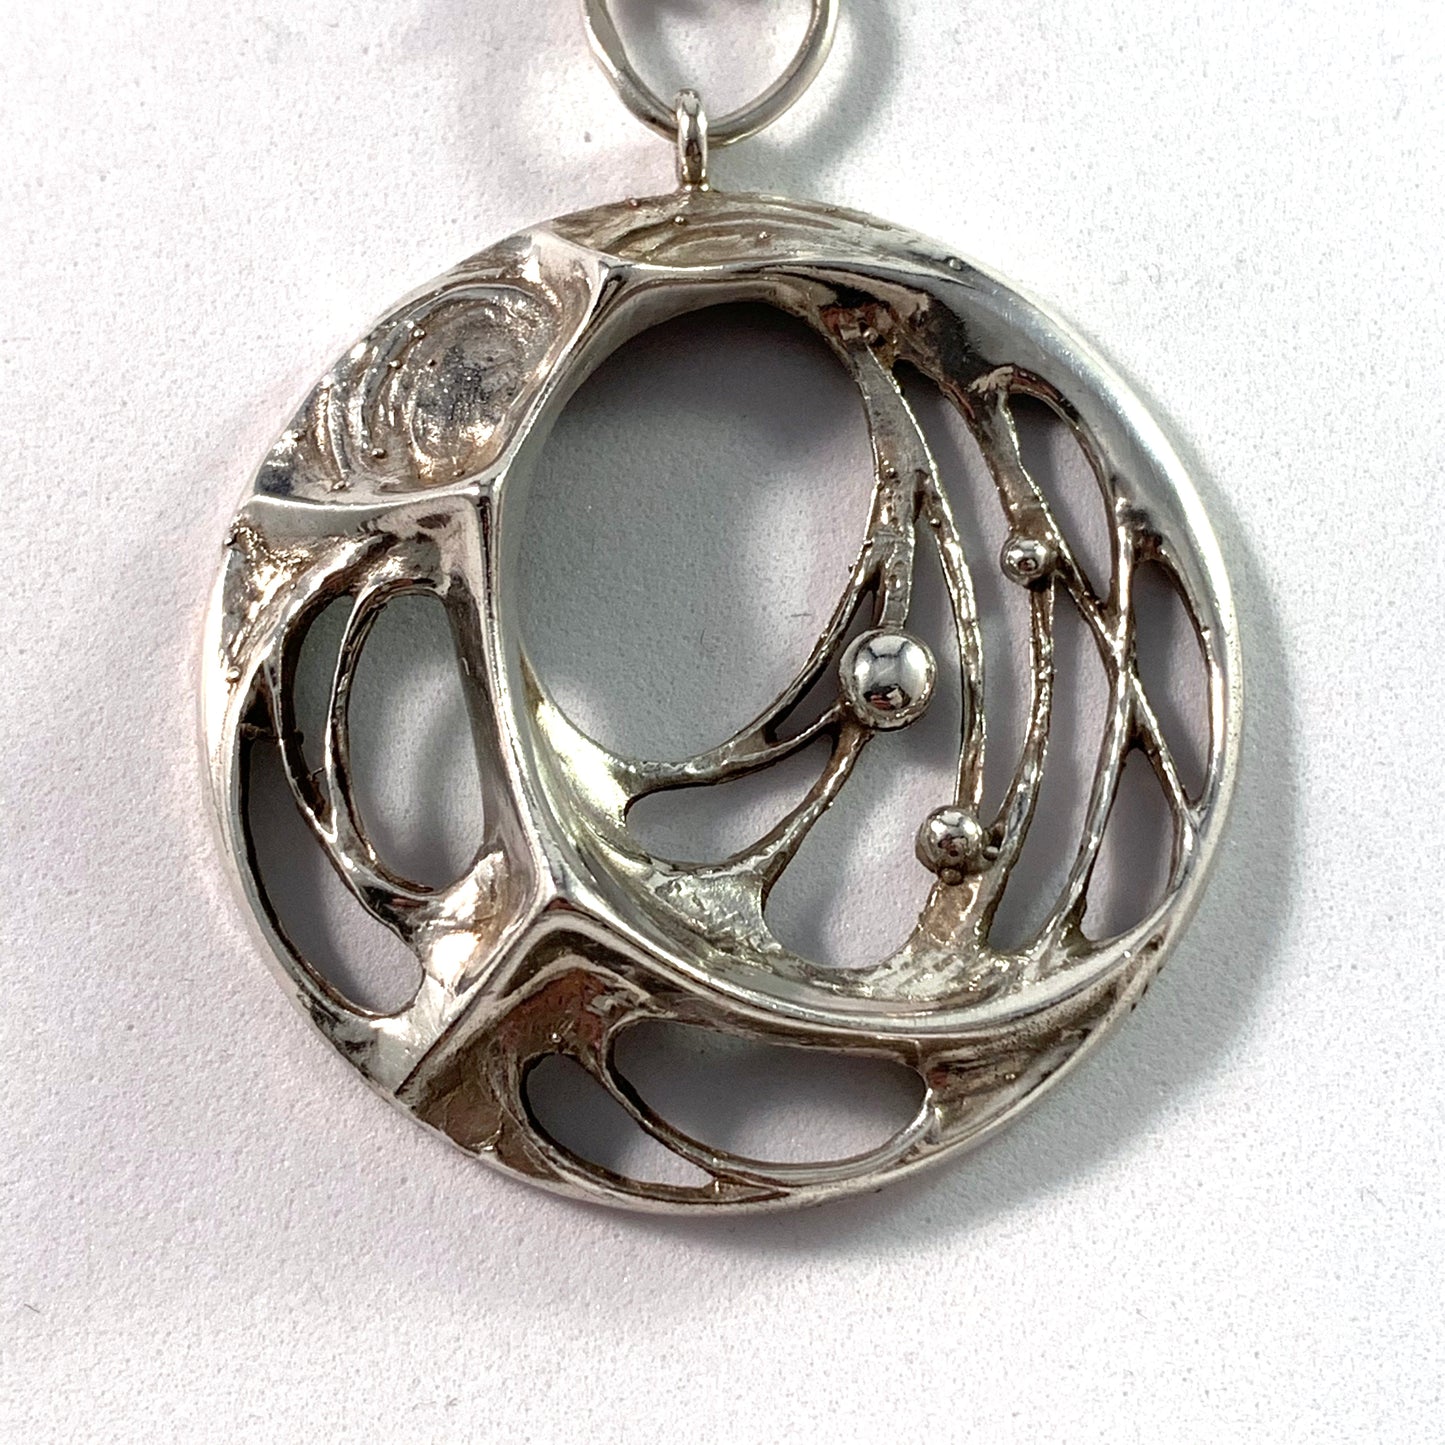 Karl Laine for Sten & Laine Finland year 1974 Sterling Silver Spider Web Pendant Necklace.